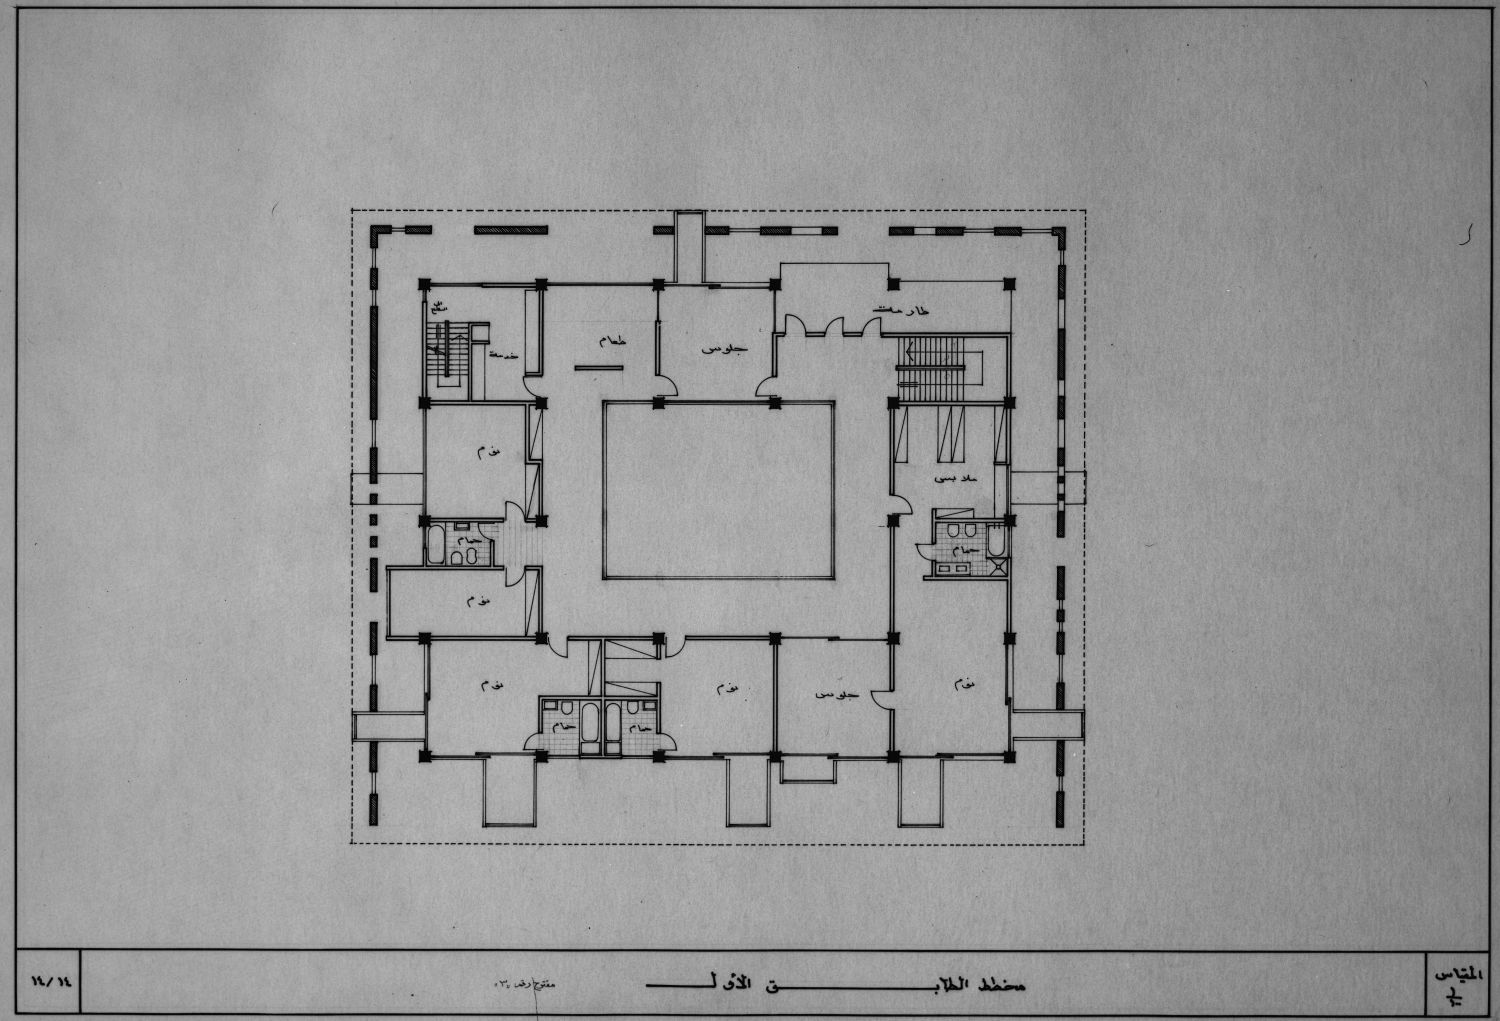 First floor plan (alternate version not adopted in final construction).